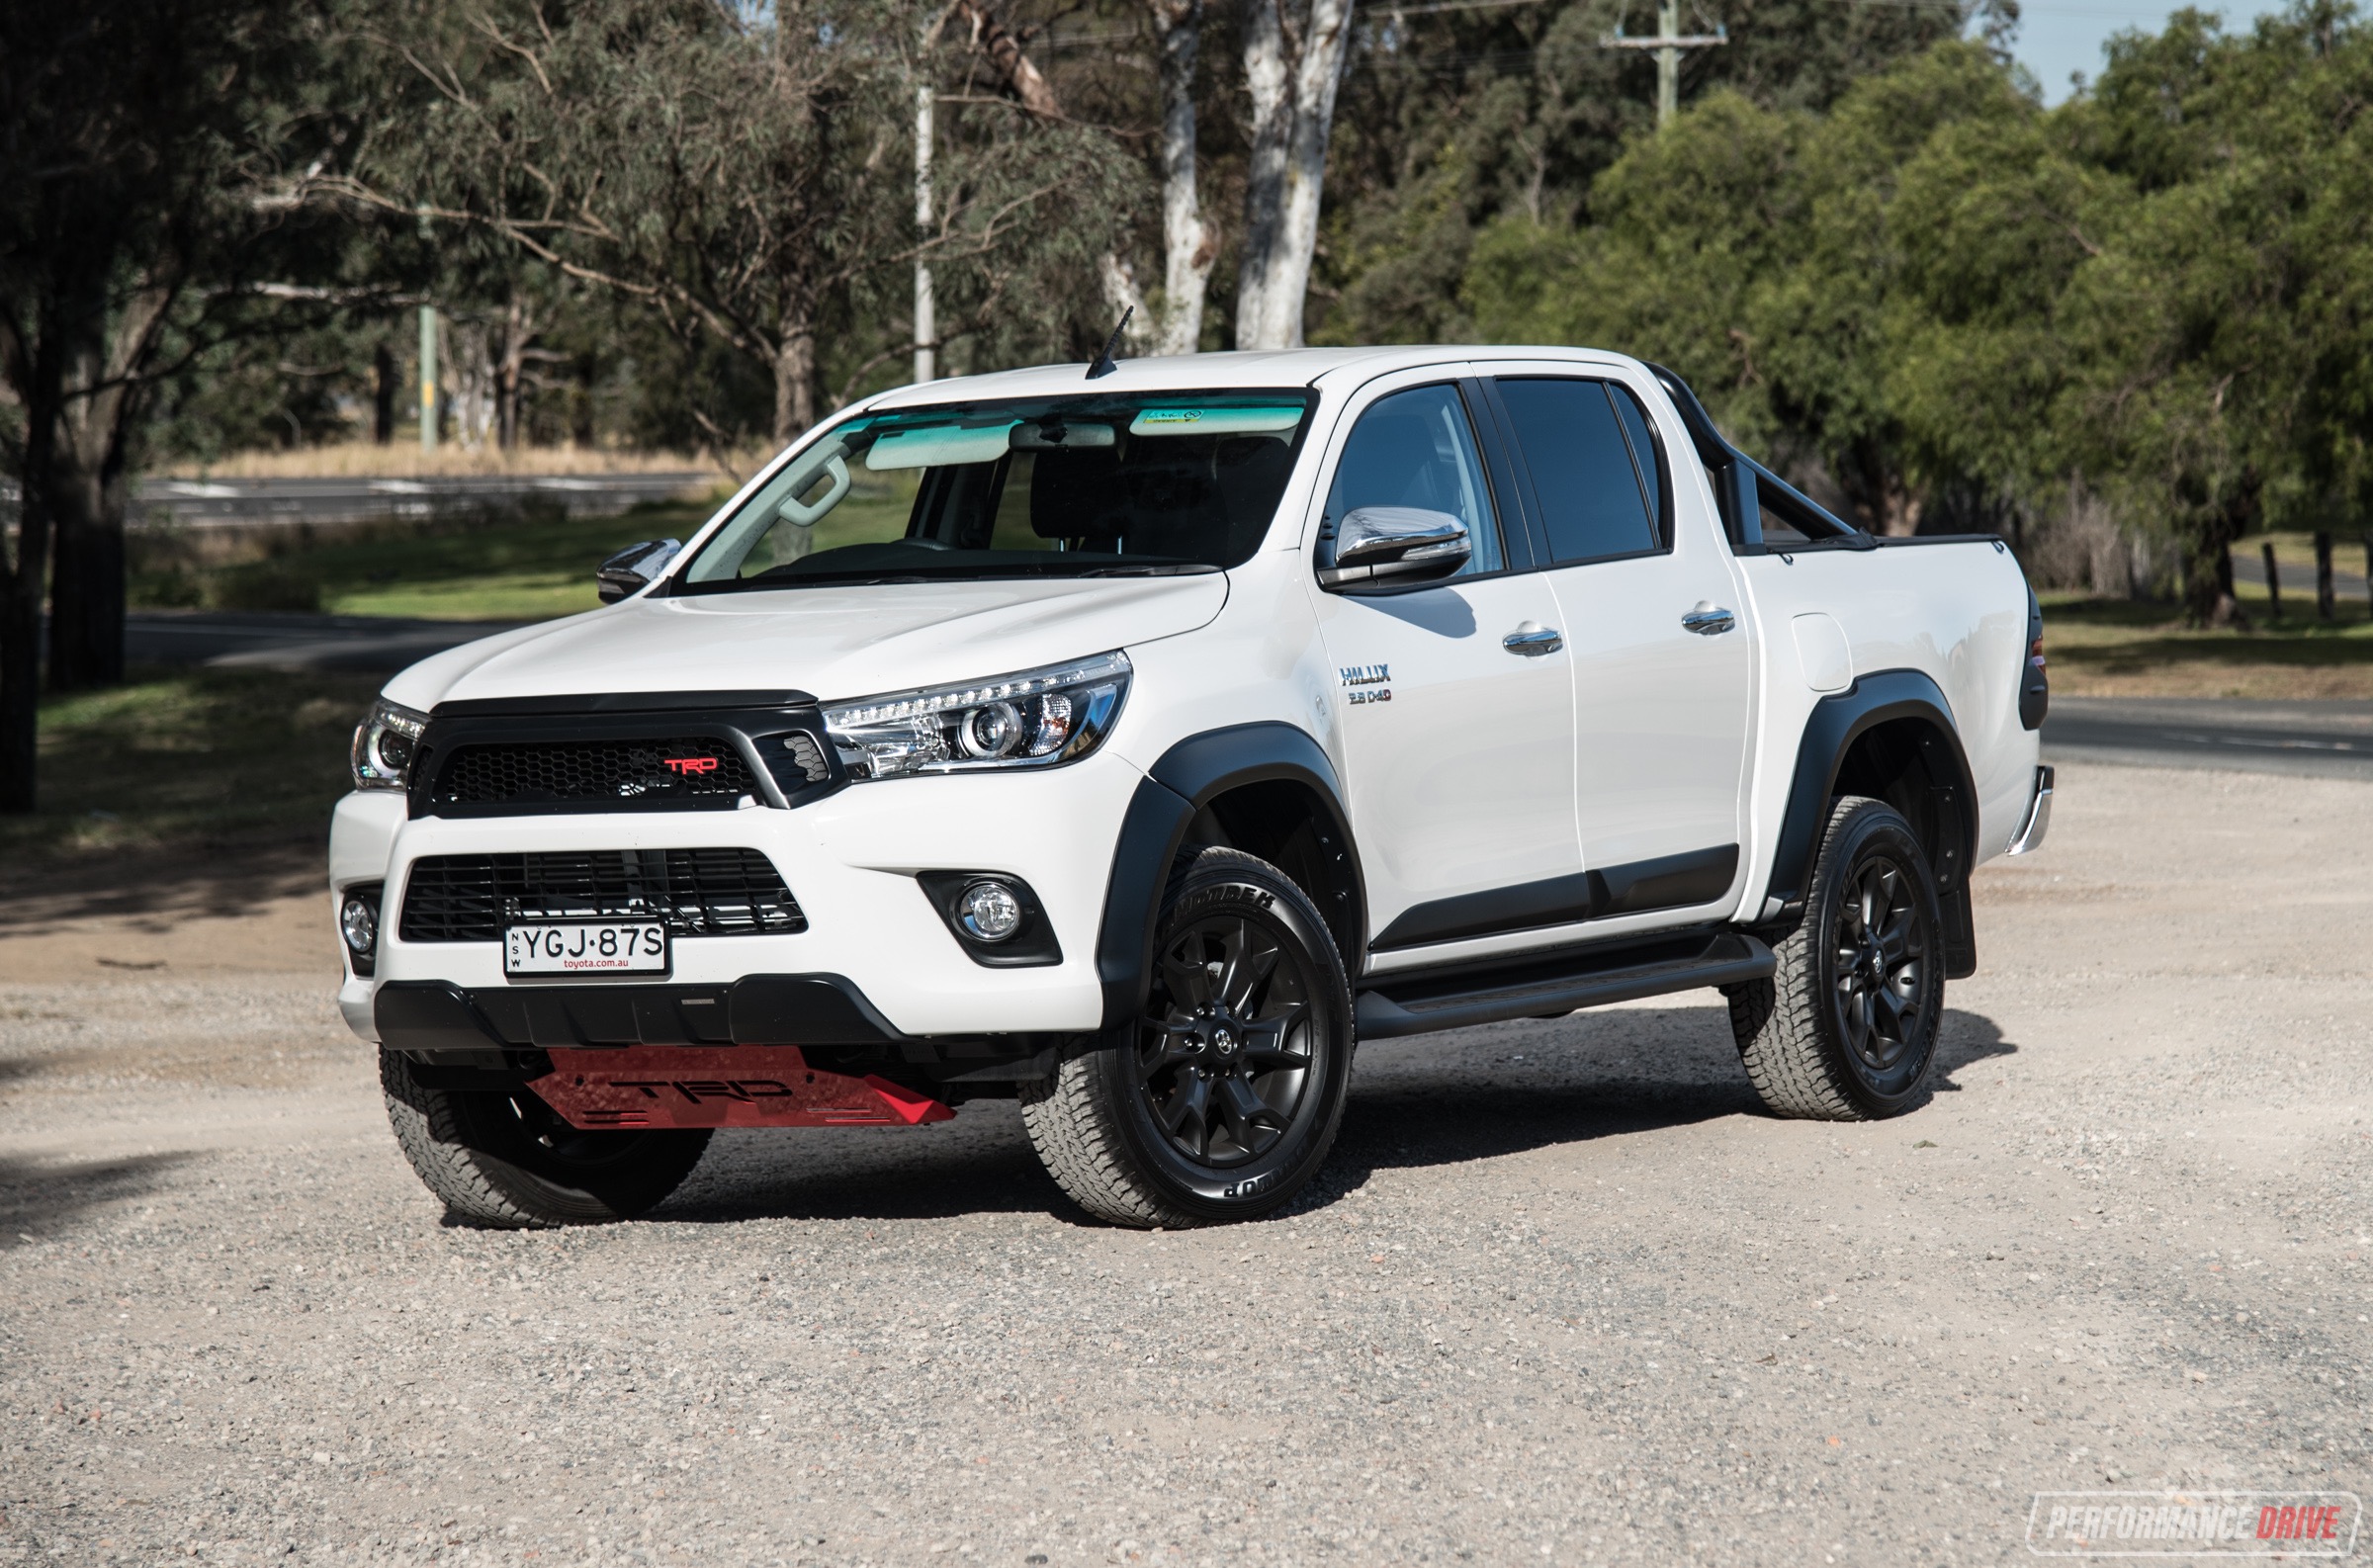 Toyota Hilux - Bing images